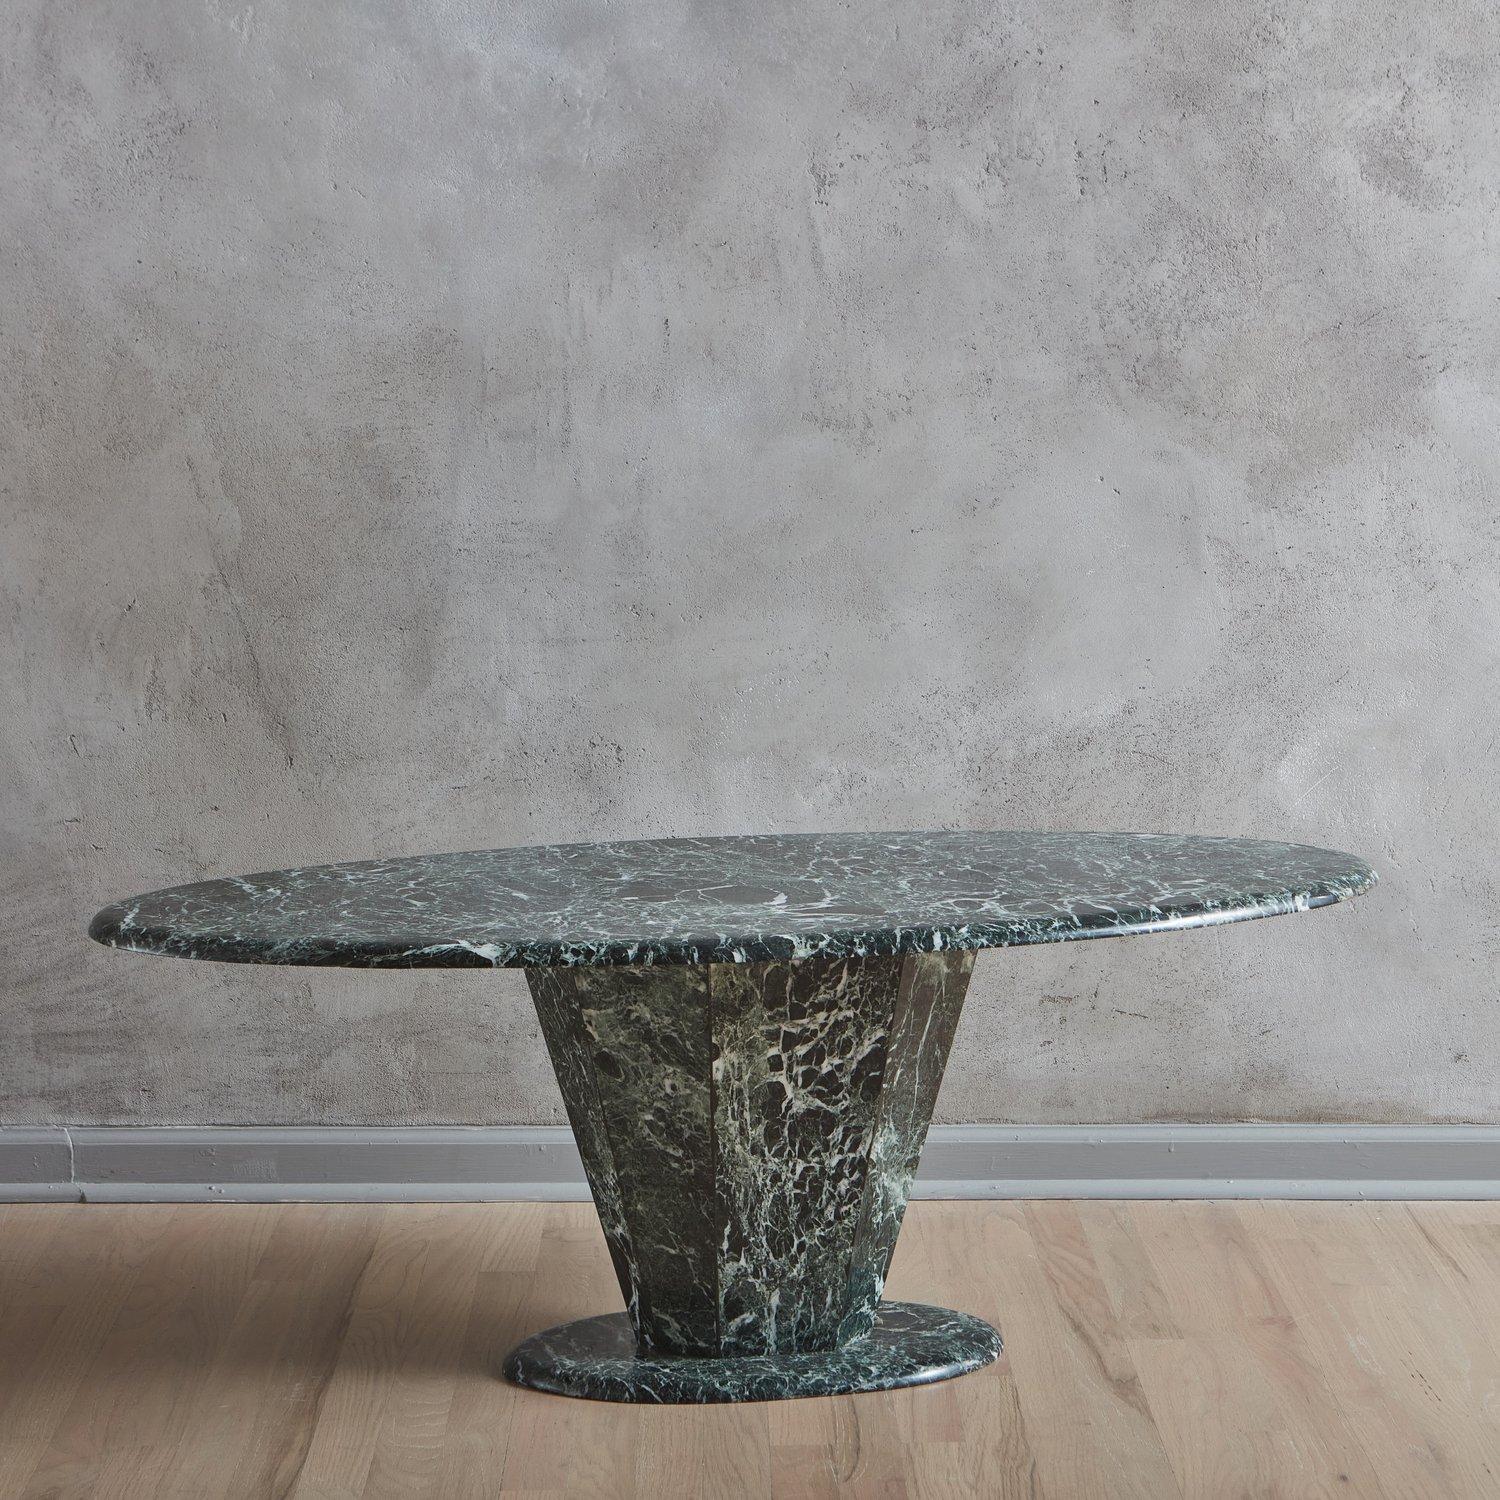 A vintage verde marble coffee table in a rich emerald hue with beautiful white veining. This piece features an oval table top with a demi bullnose edge and a faceted, tapered pedestal base. Unmarked. 20th Century.

